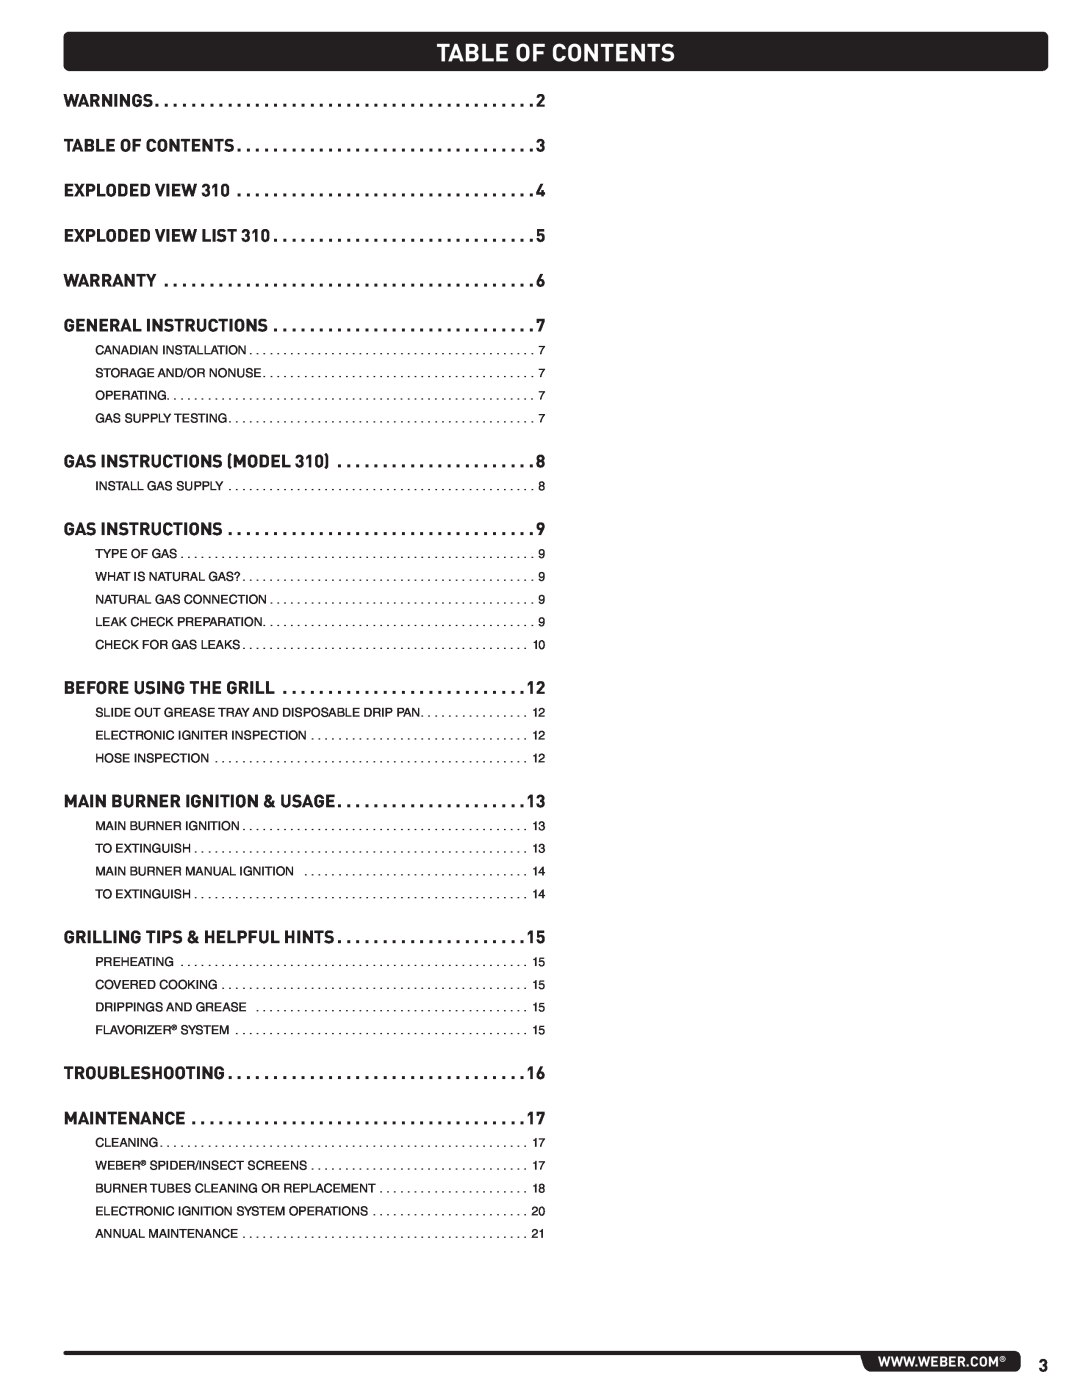 Weber 56515 manual Table Of Contents 